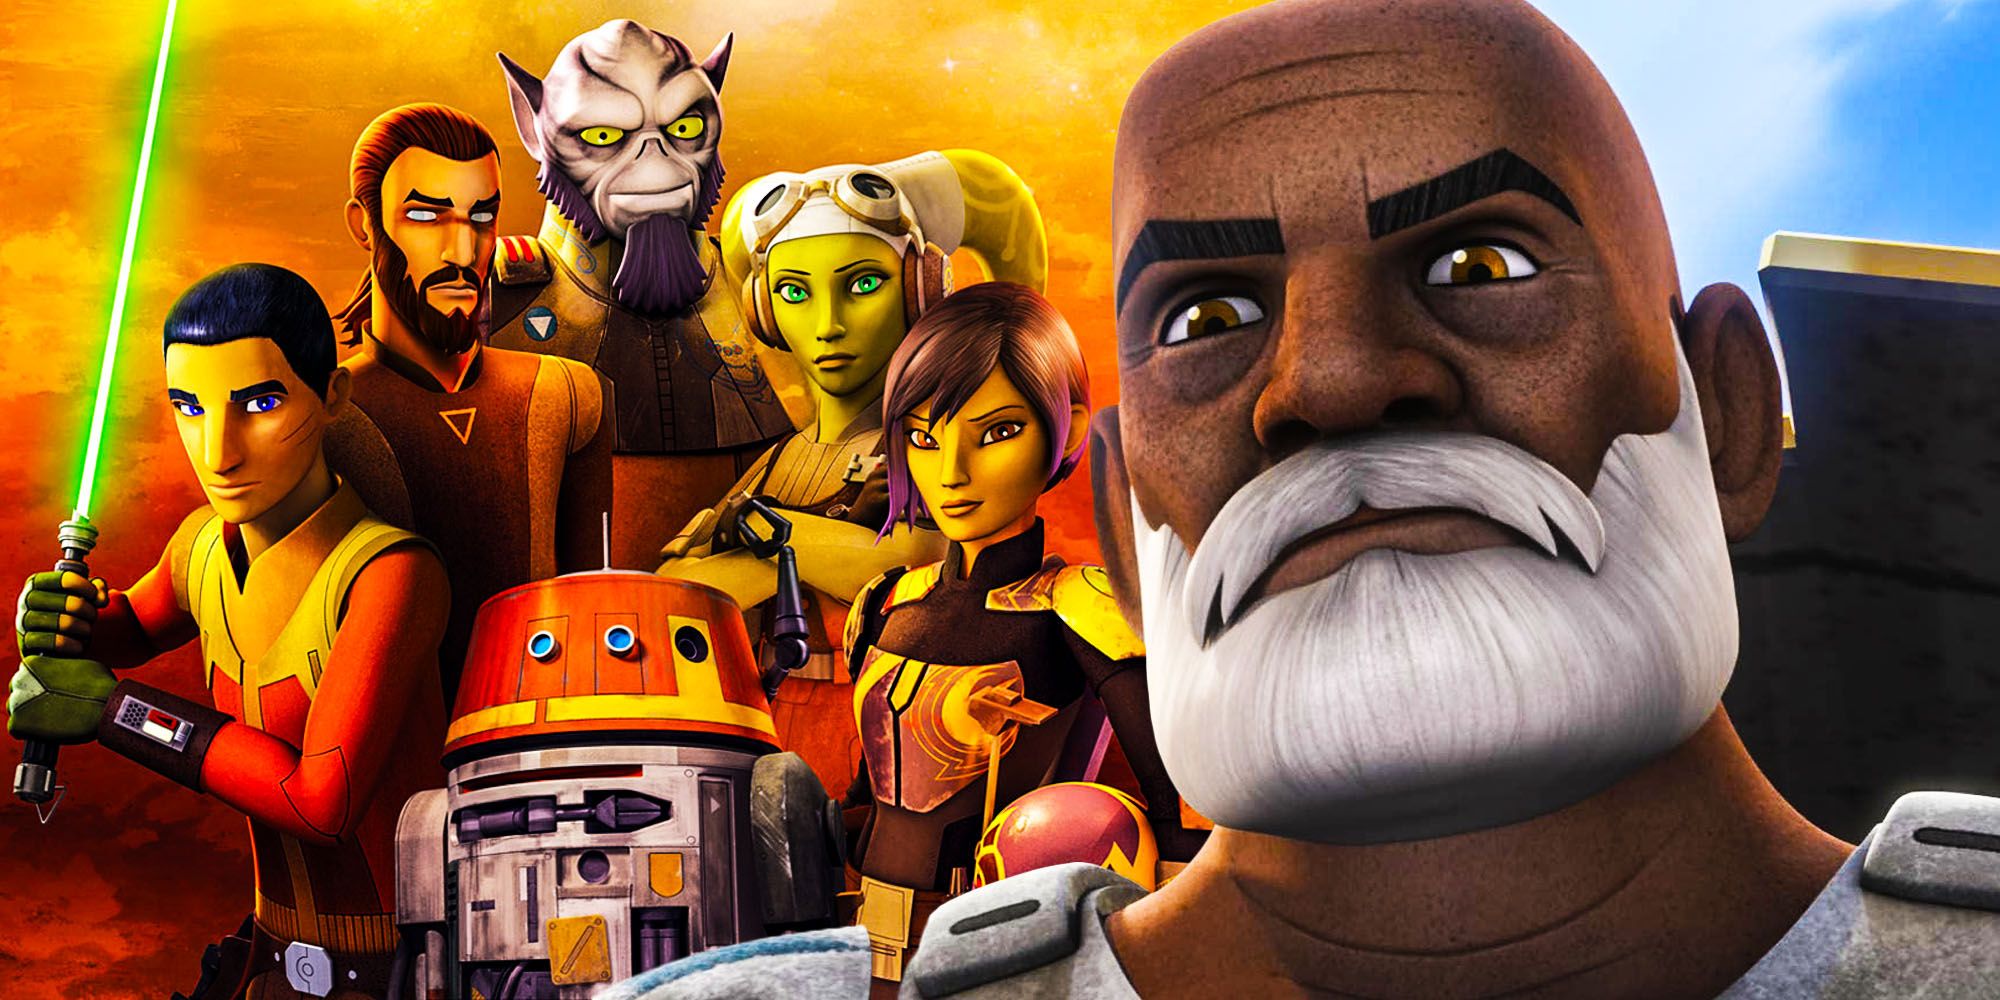 Captain rex needs a spinoff after star wars rebels